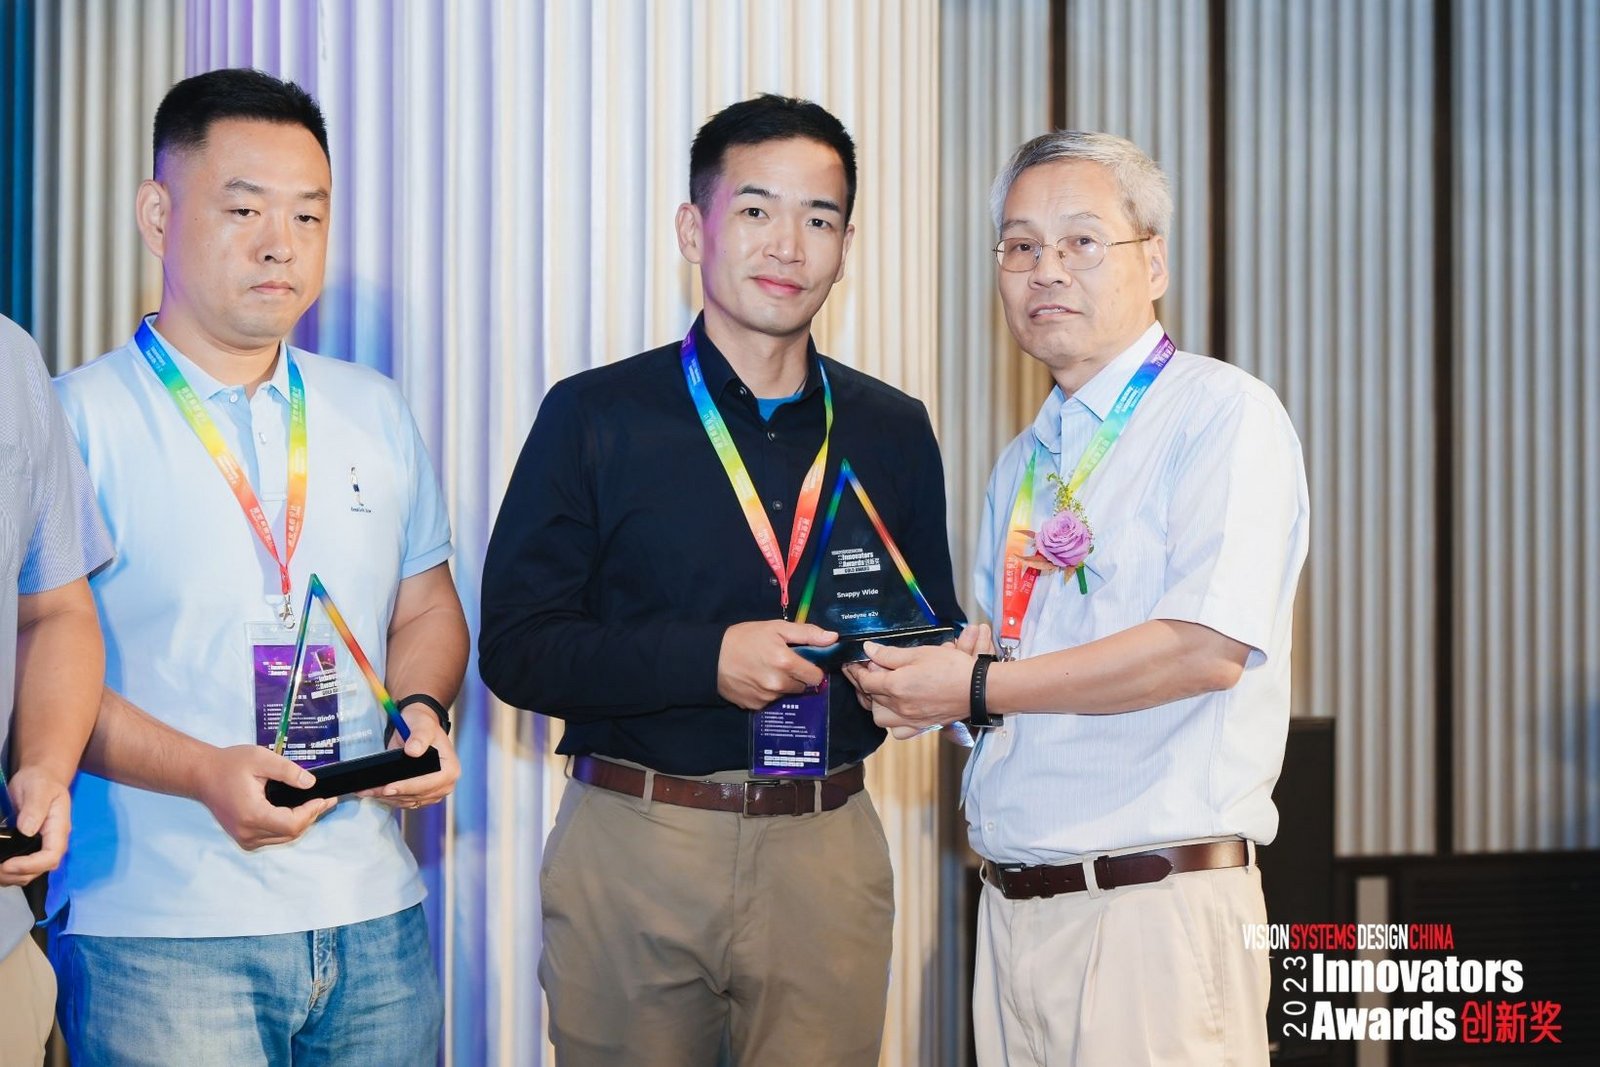 At the Vision System Design China Innovators Gold Award Ceremony, Tom Huang, General Manager APAC at Allied Vision, receives the award for Allied Vision (in the middle).